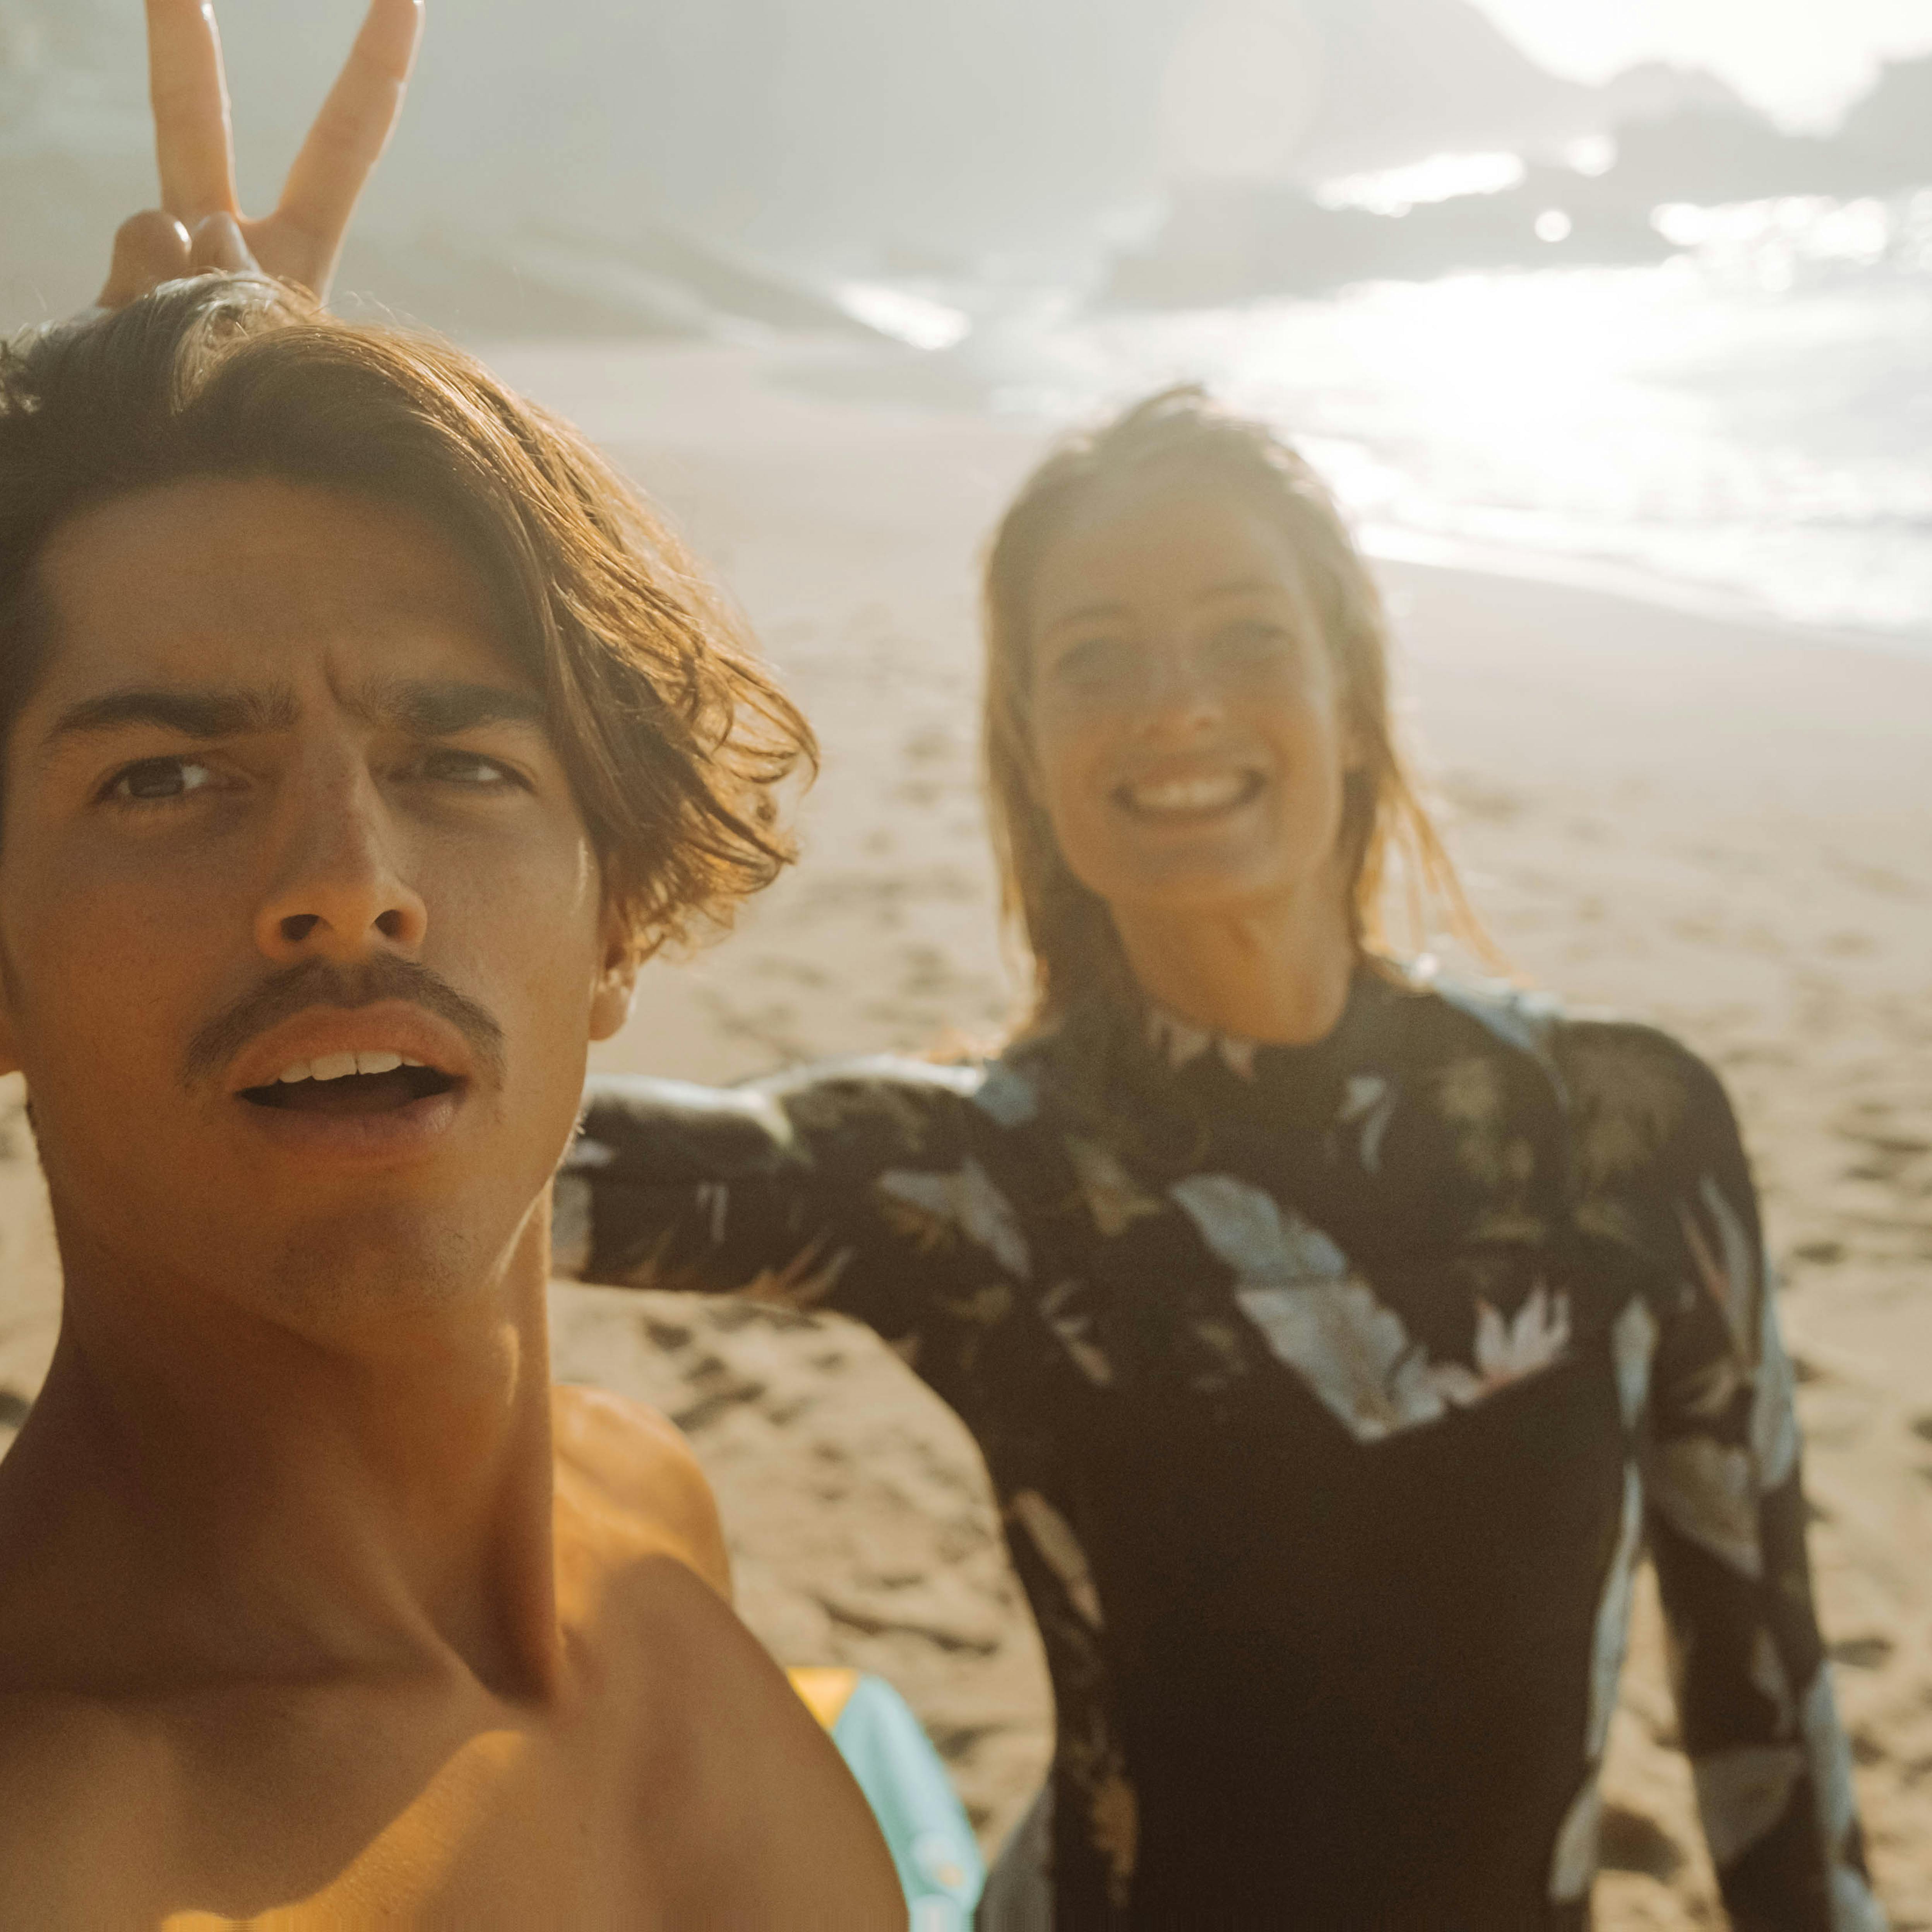 Wild Surfing With Lola and James